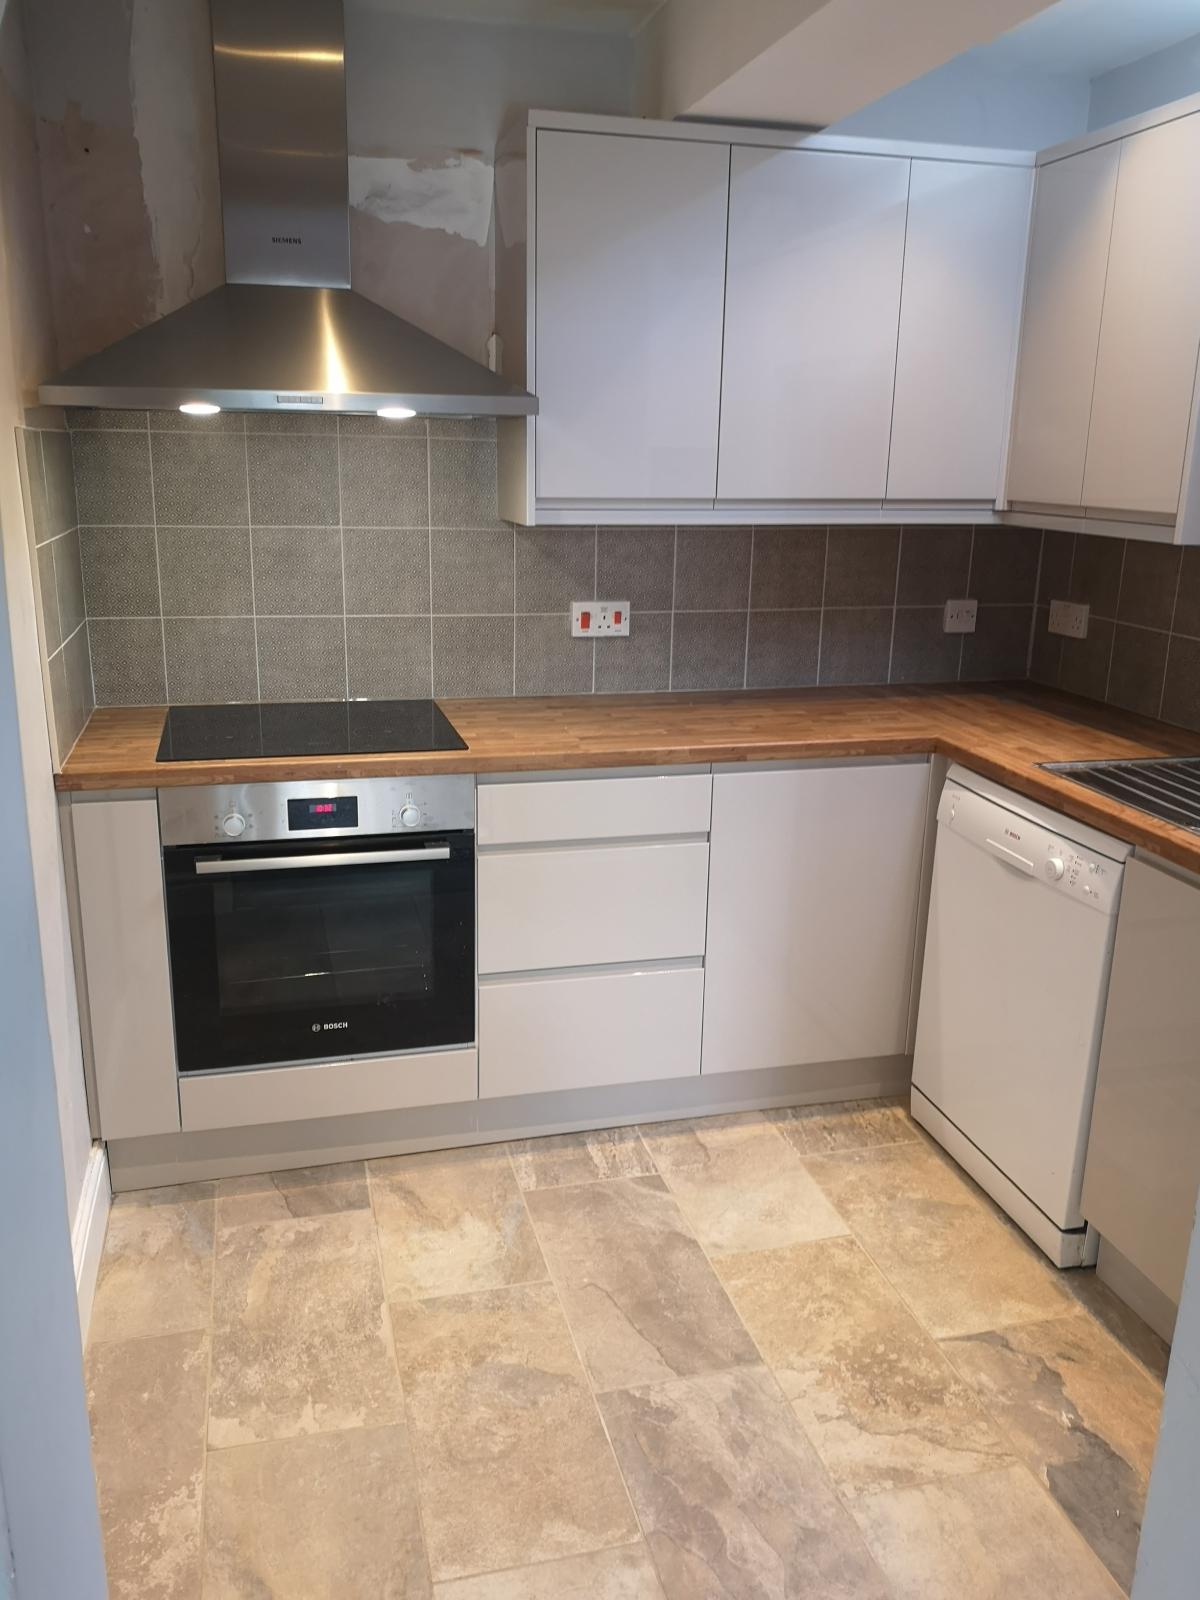 We are both most delighted with our new kitchen . We were impressed with your abilities, attention t...